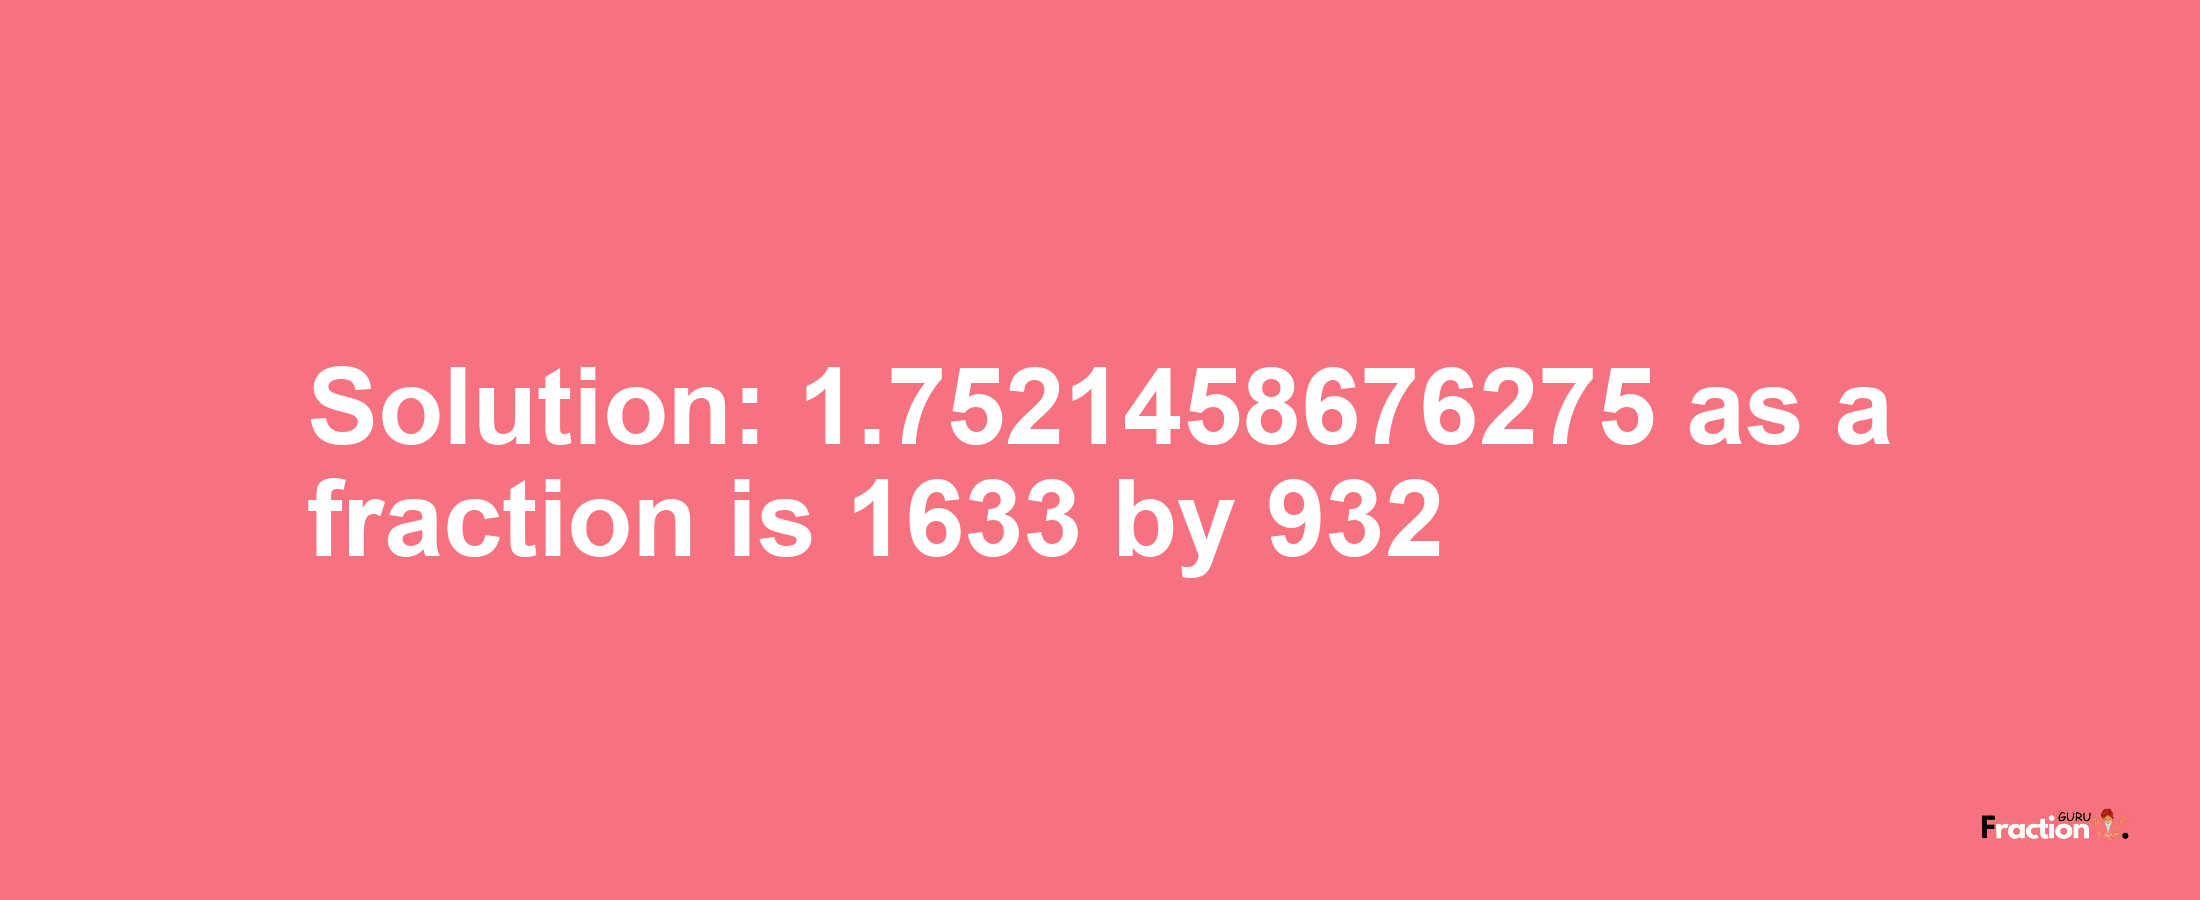 Solution:1.7521458676275 as a fraction is 1633/932